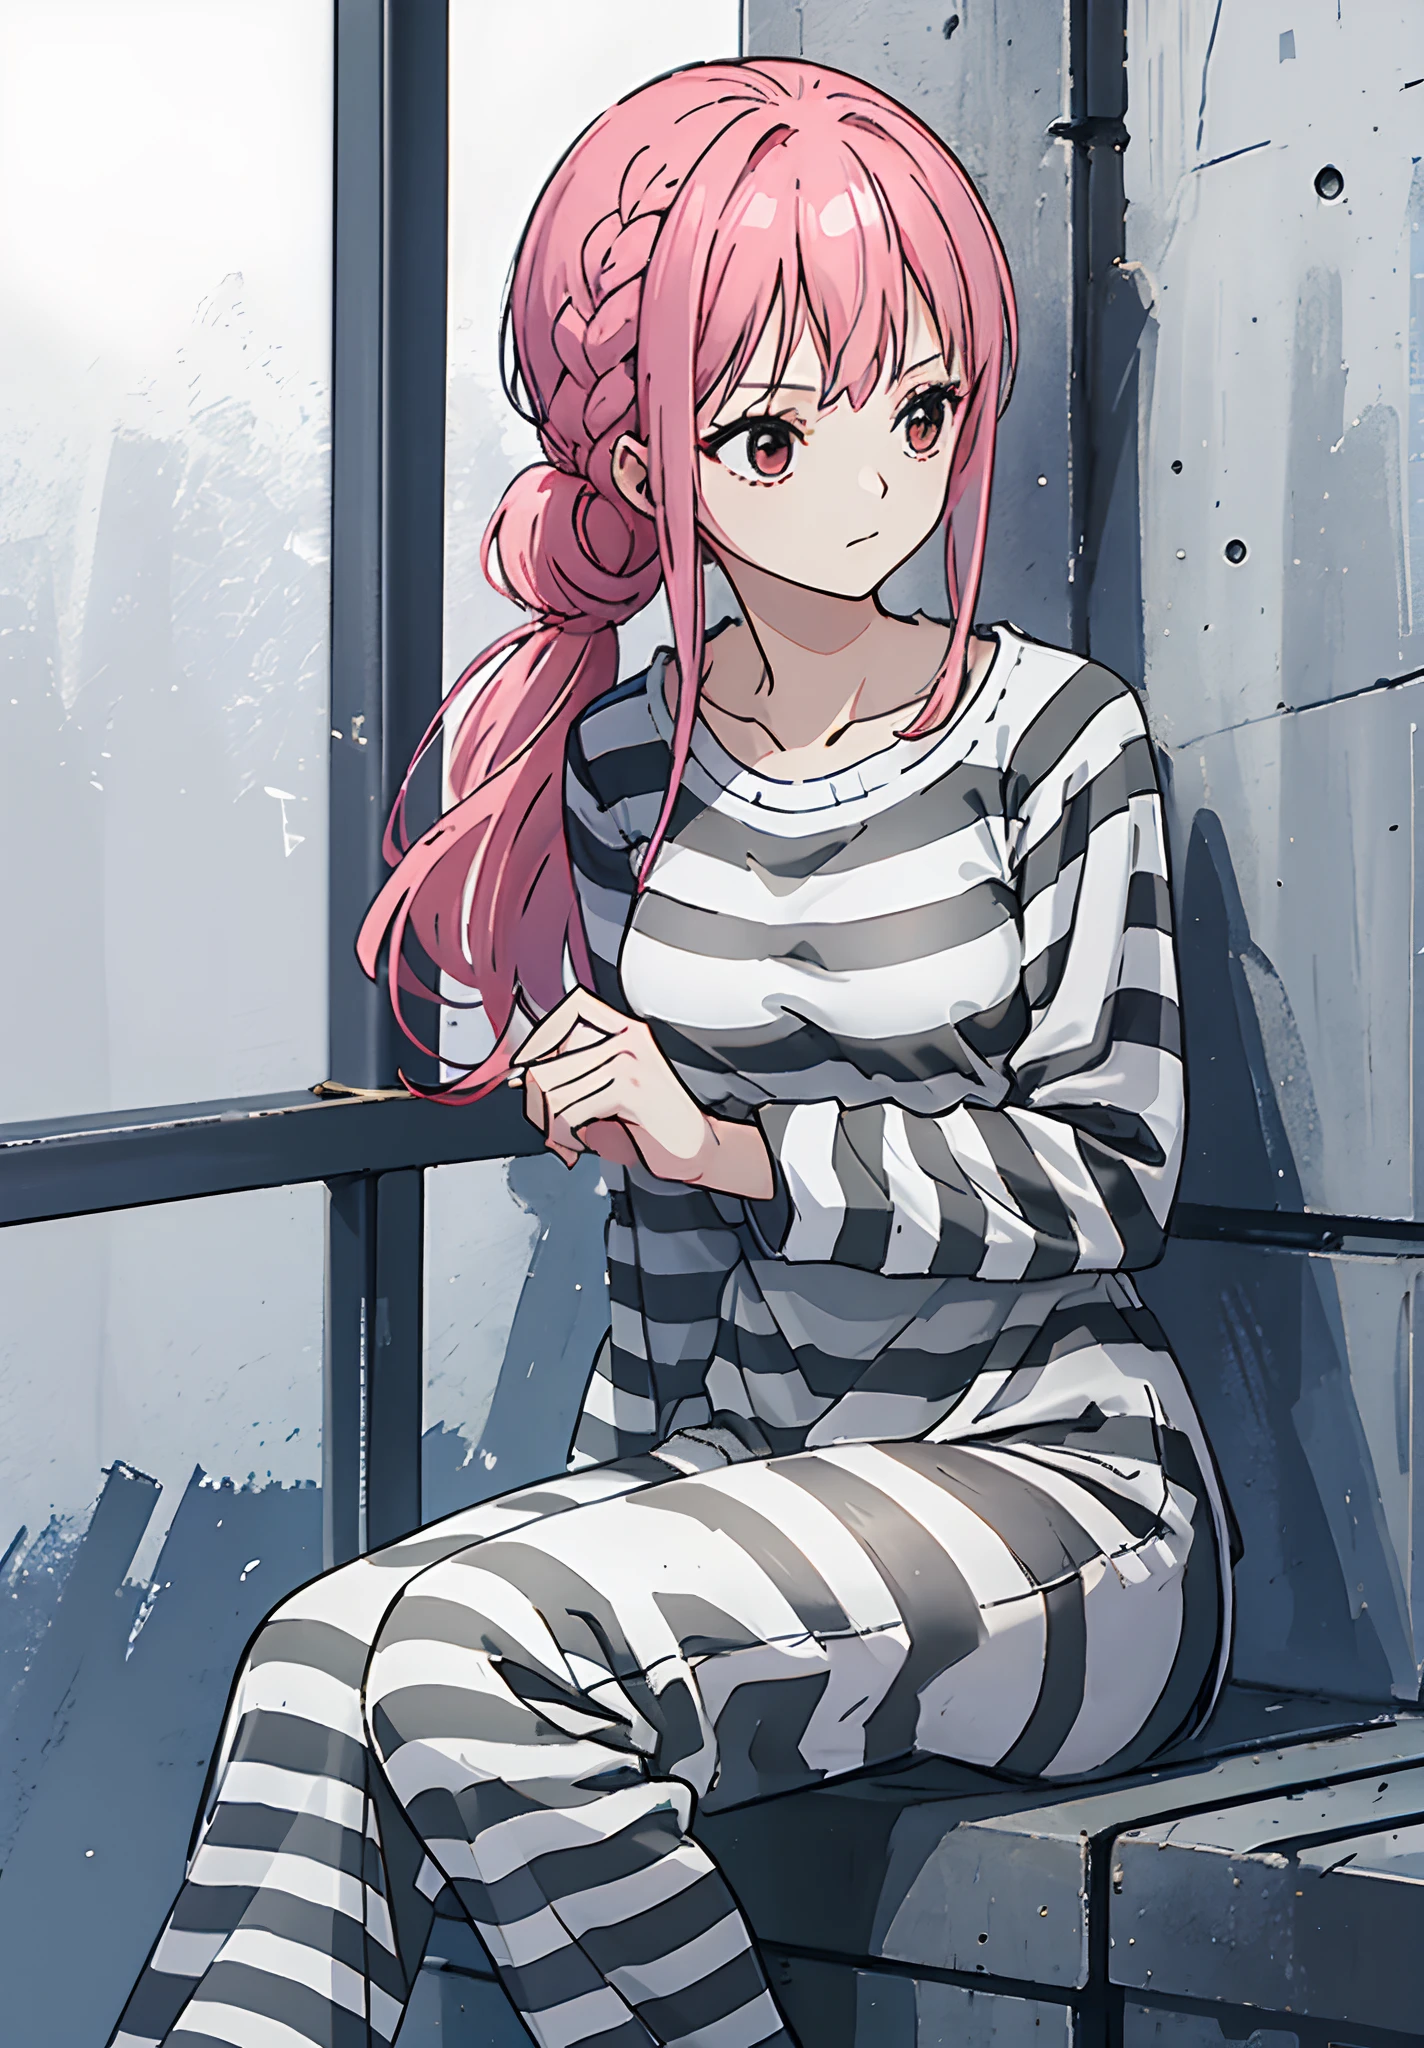 a girl, in prison, sitting in a prison, in a prison cell, prisoner, detailed fanart, jail, (((priclothes))), (((striped clothes))), shirt, outfit, (long sleeves), prisoner, clothes, clothing, pants, black and white stripes, anime,